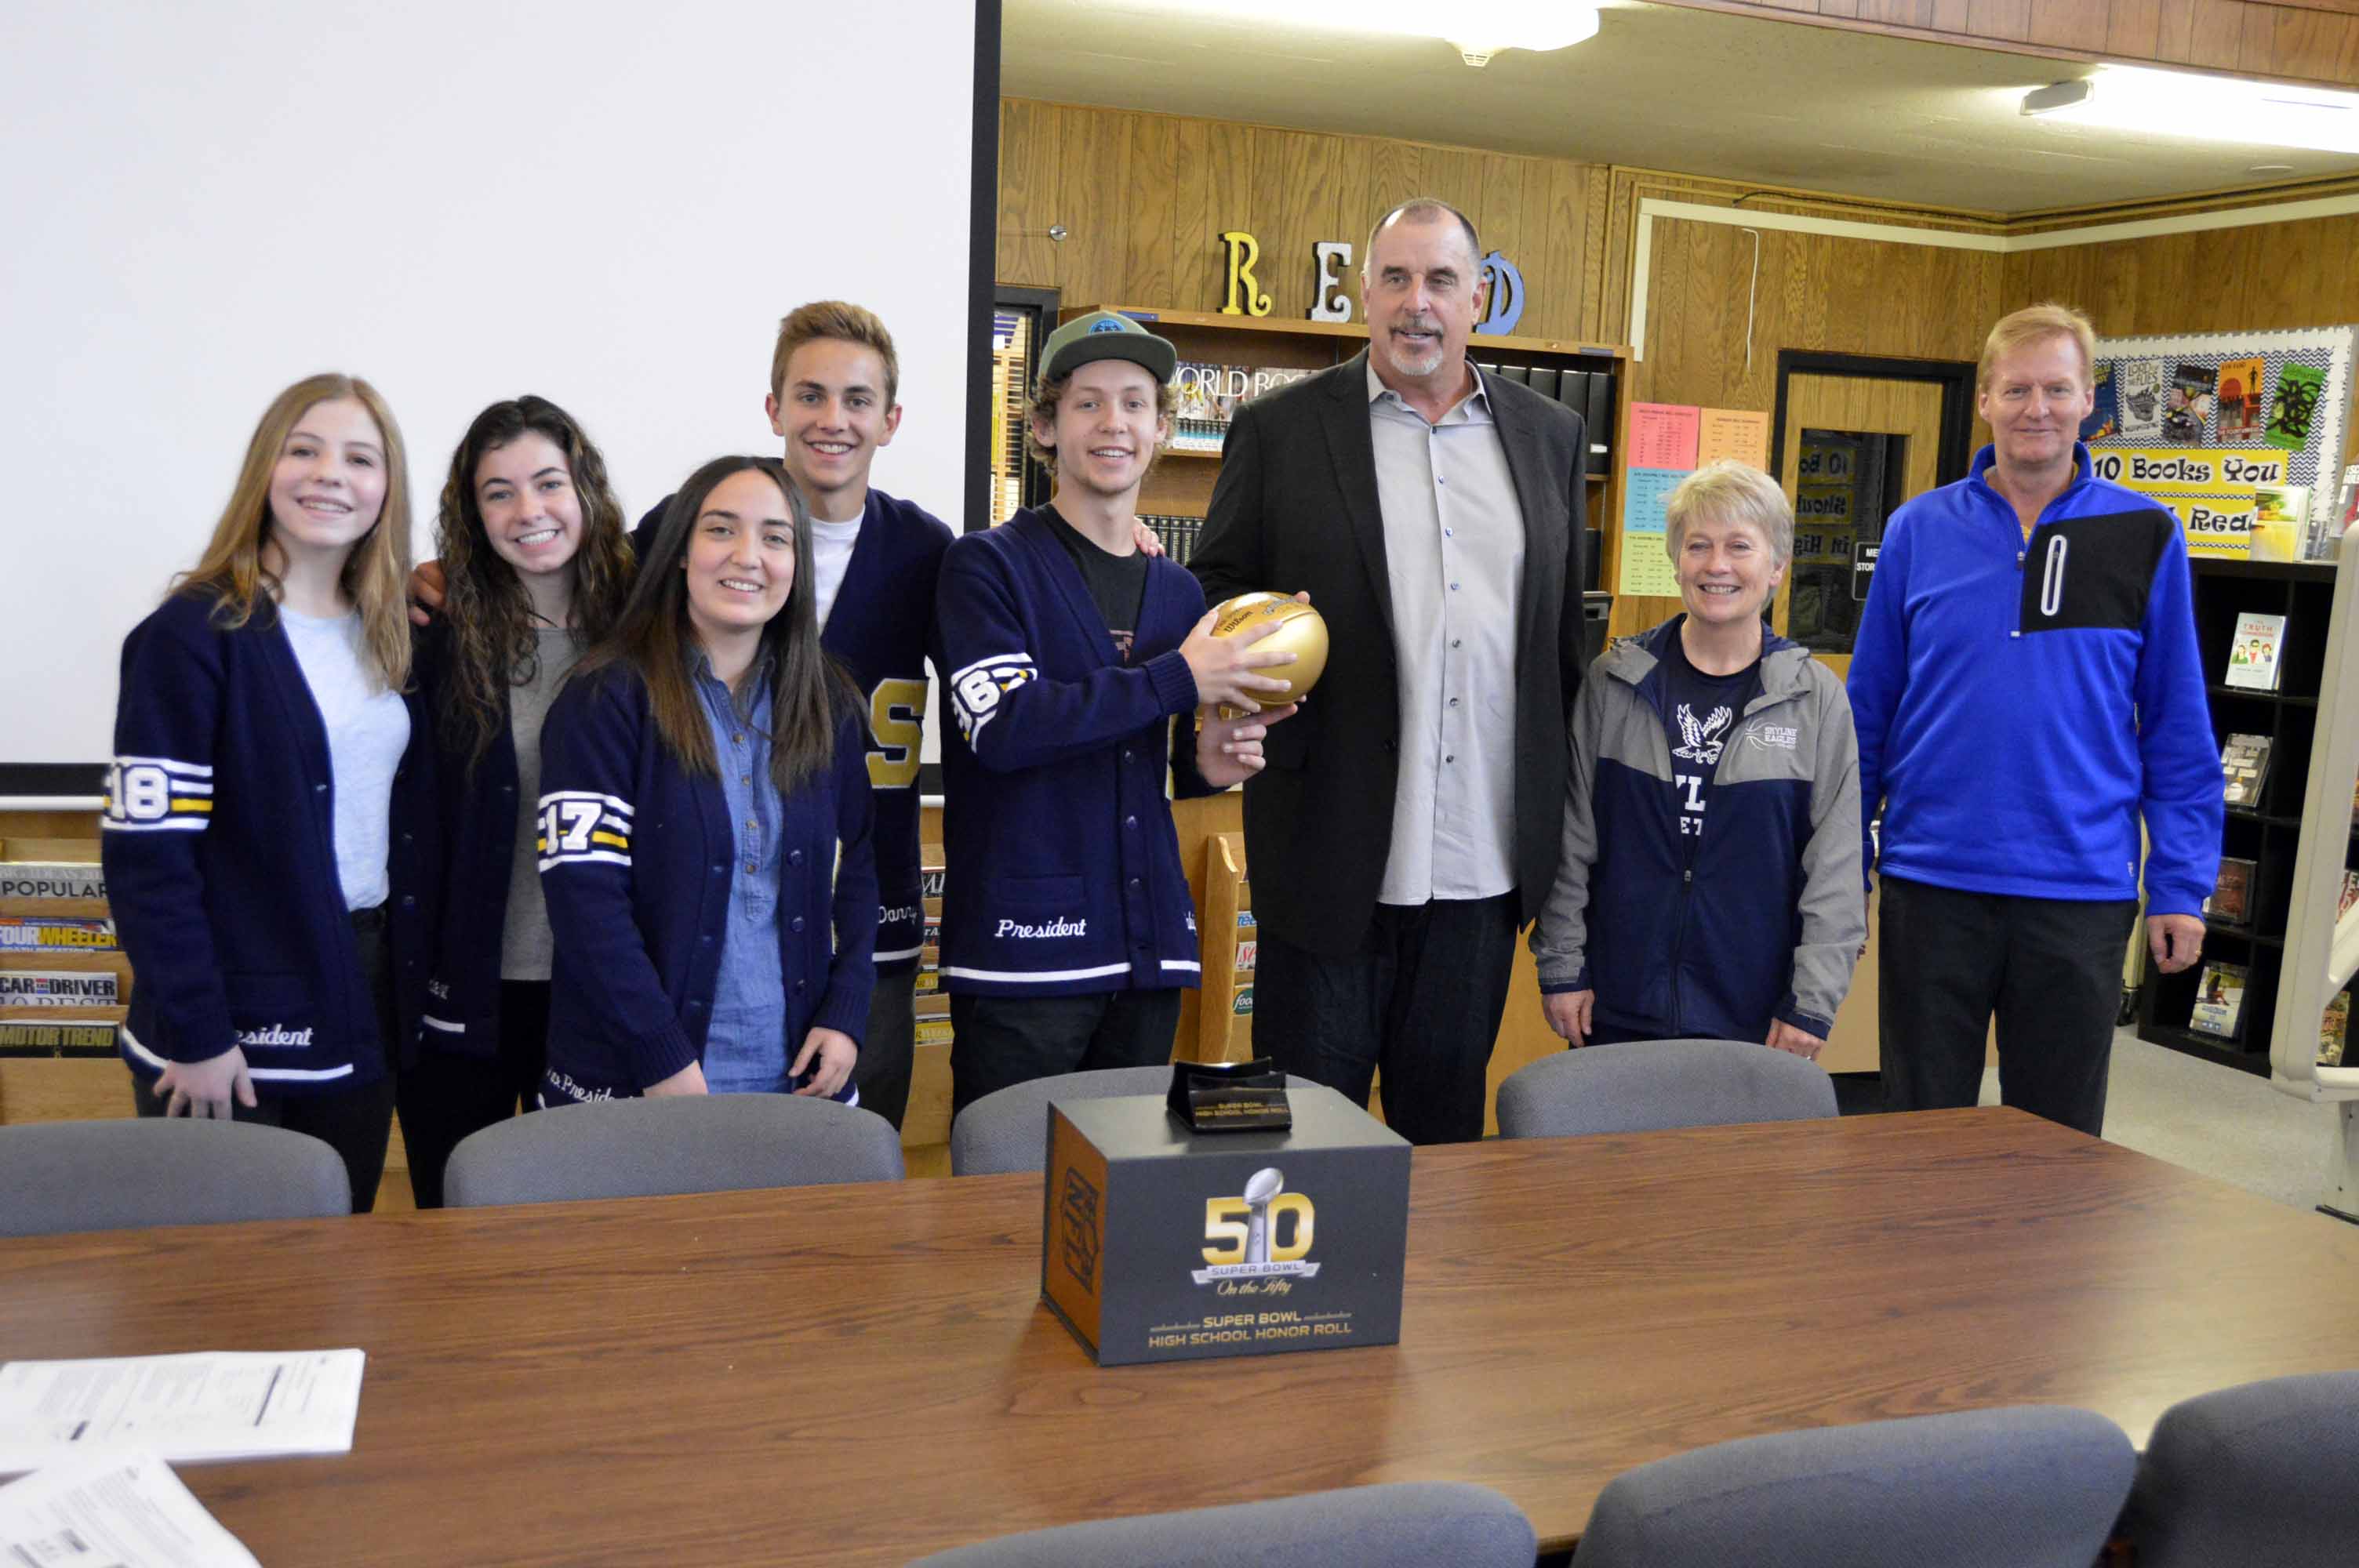 Former NFL player presents commemorative gold football to alma mater